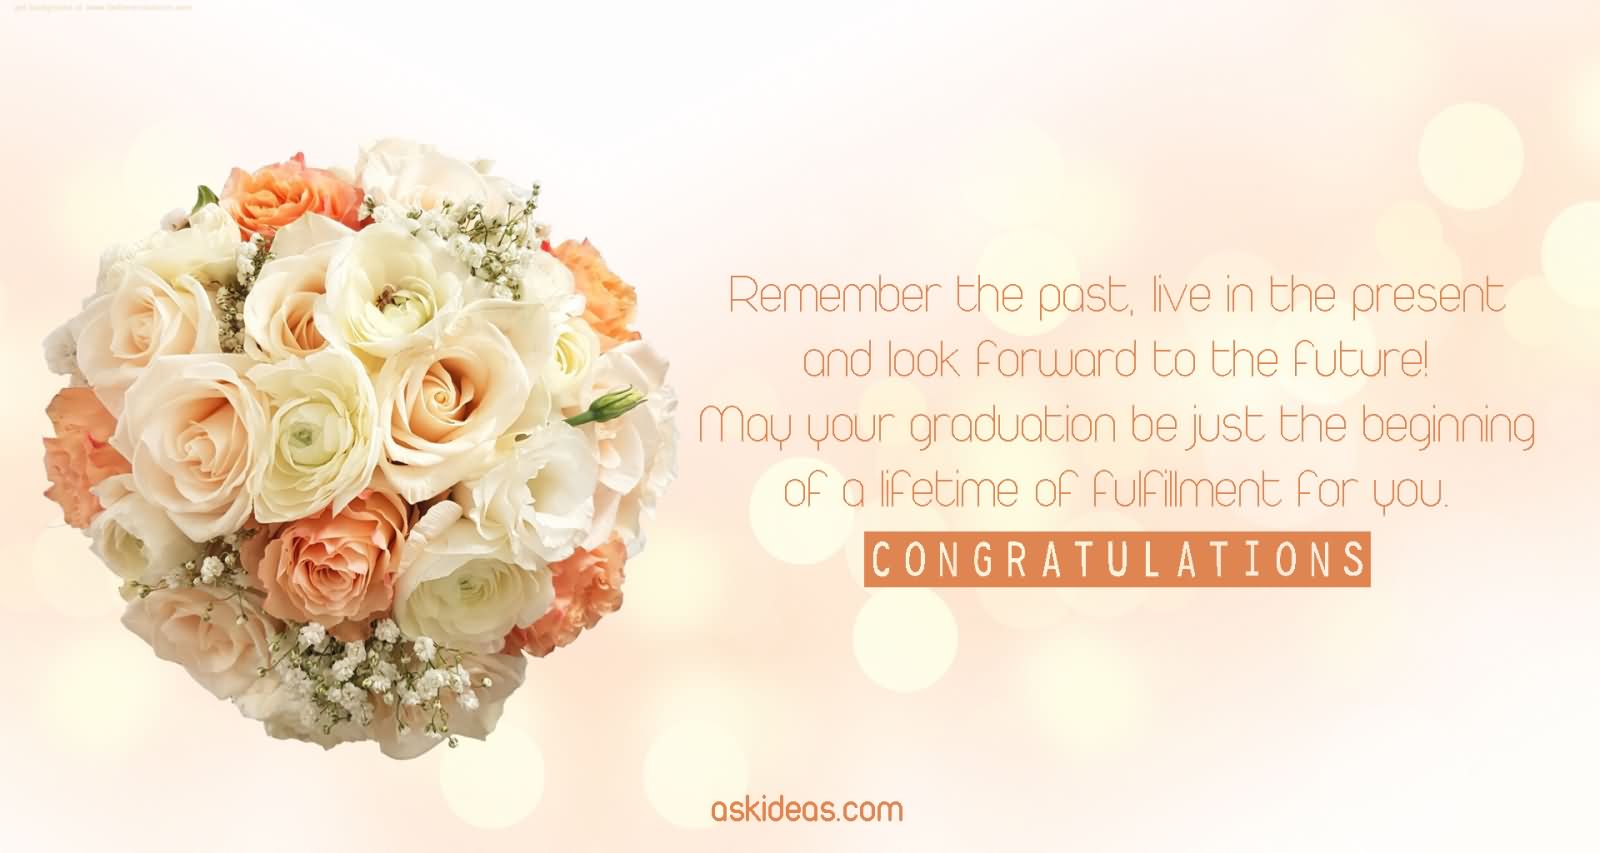 Remember the past, live in the present and look forward to the future! May your graduation be just the beginning of a lifetime of fulfillment for you.